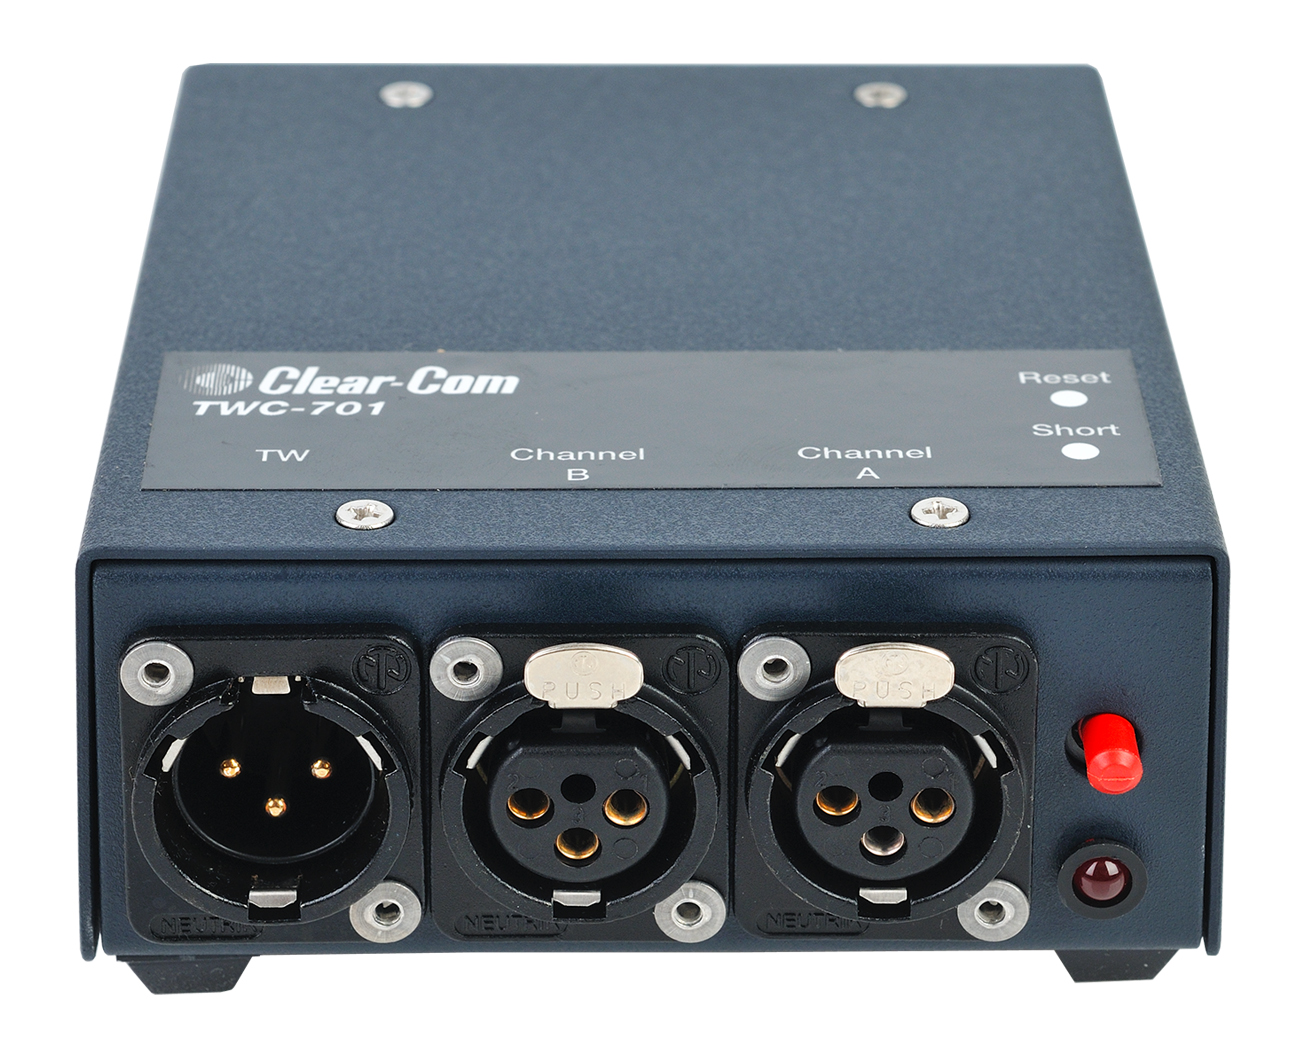 The TWC-701 is a stand-alone adaptor that combines two standard Clear-Com intercom channels (on two separate cables) onto a single standard 3-pin microphone cable.